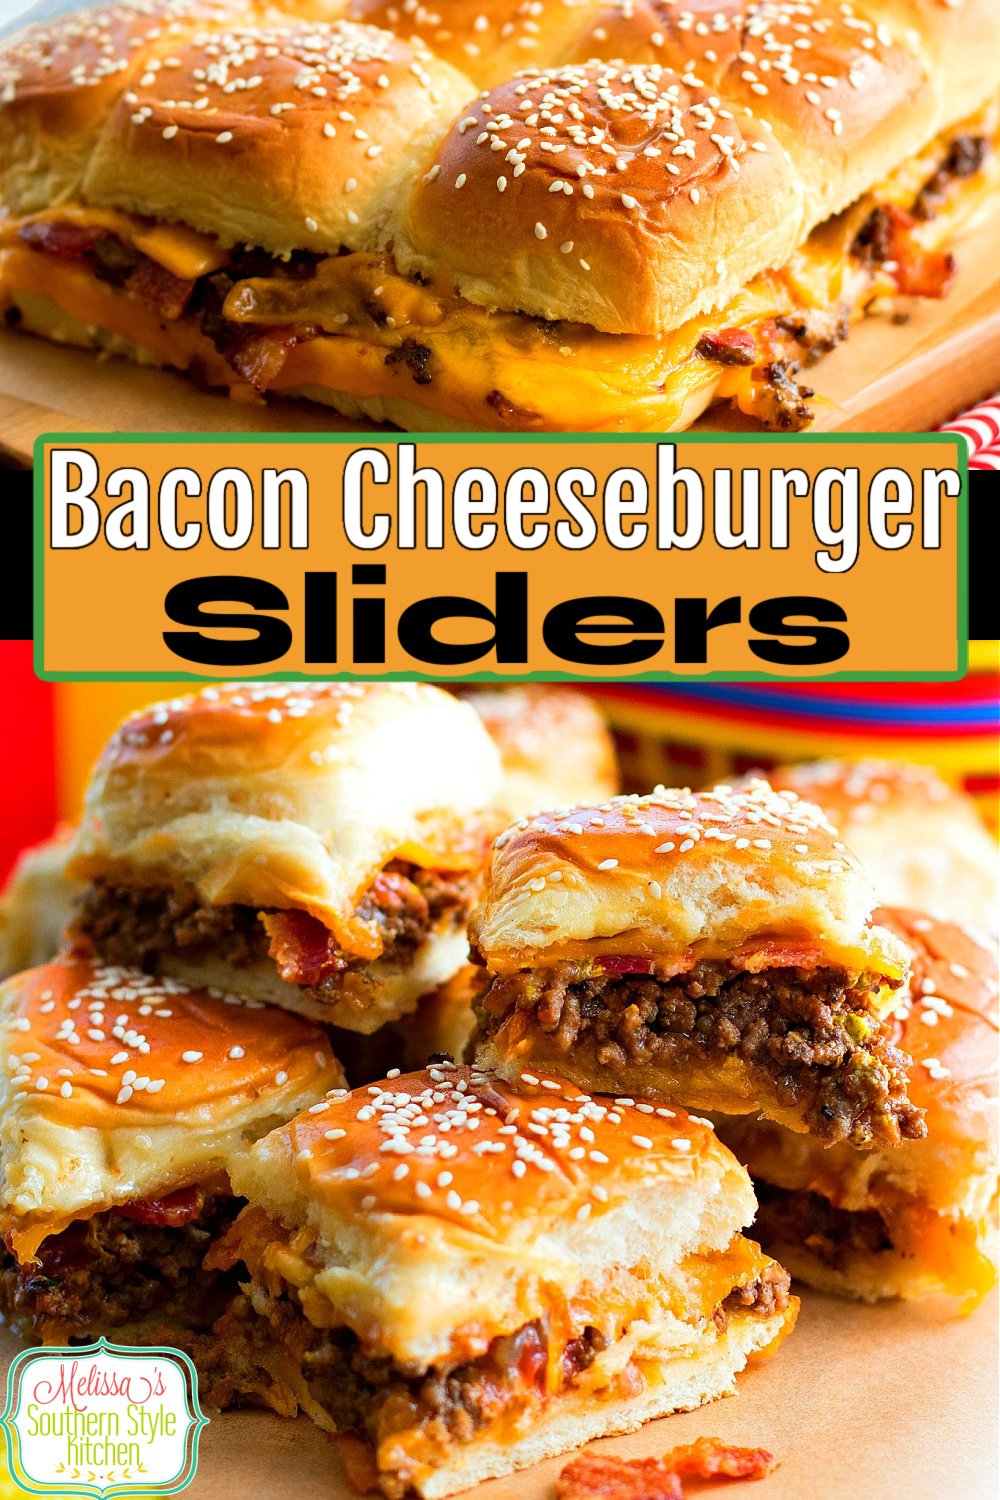 Enjoy these irresistible pull apart Bacon Cheeseburger Hawaiian Sweet Roll Sliders for snacking and casual meals #cheeburgersliders #baconcheeseburgers #cheeseburgers #sliderrecipes #Hawaiiansweetrolls #pullapartrolls #sweetrolls #dinnerideas #tailgating #dinner #southernrecipes #southernfood #easygroundbeefrecipes #dinner via @melissasssk